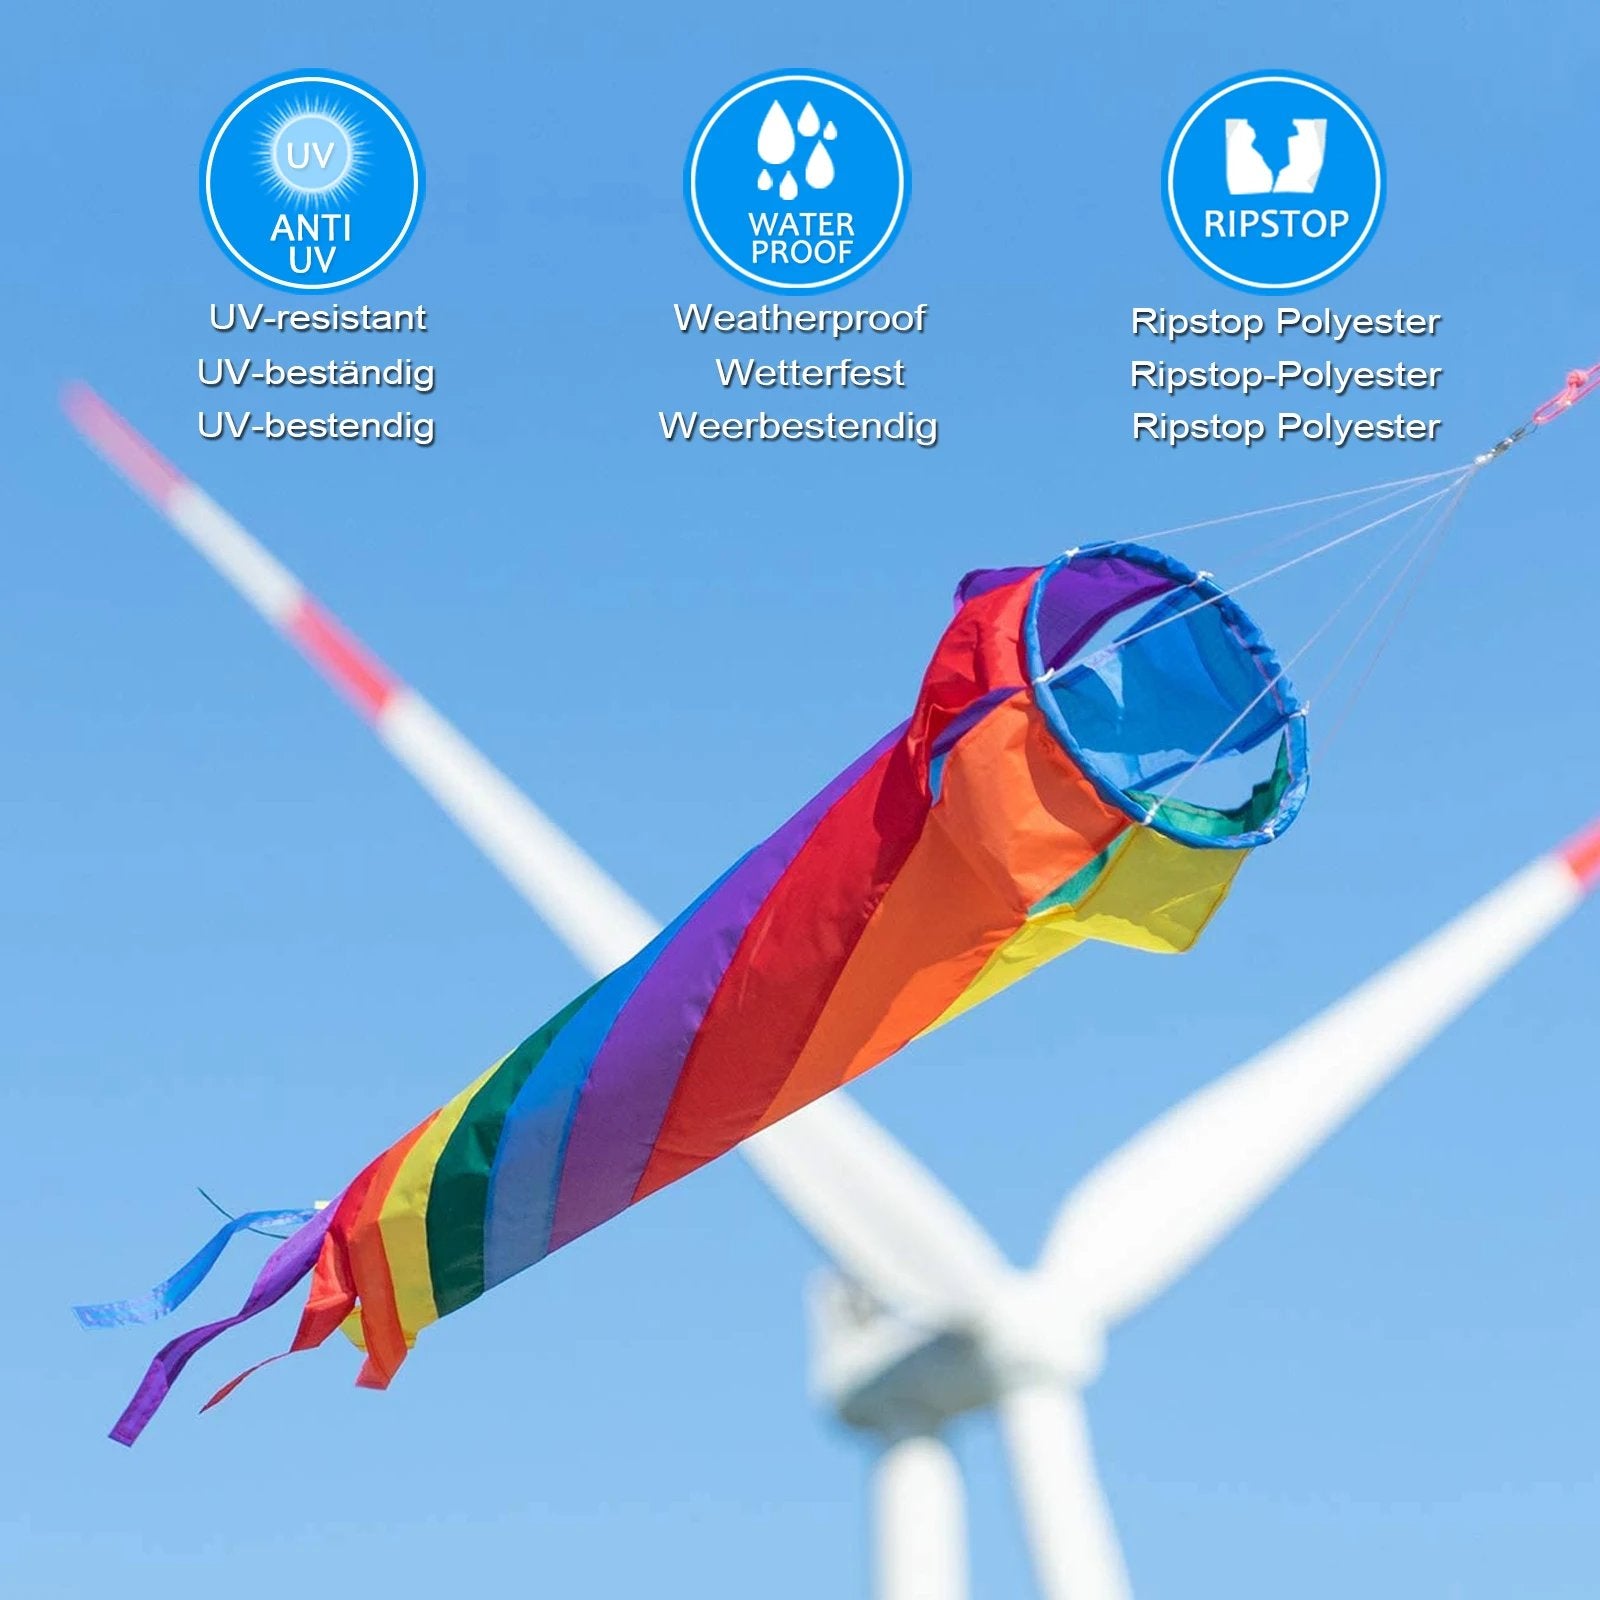  Rainbow Spinning Turbine Windsock with Ball Bearing Swivels for Flag Poles Kite 